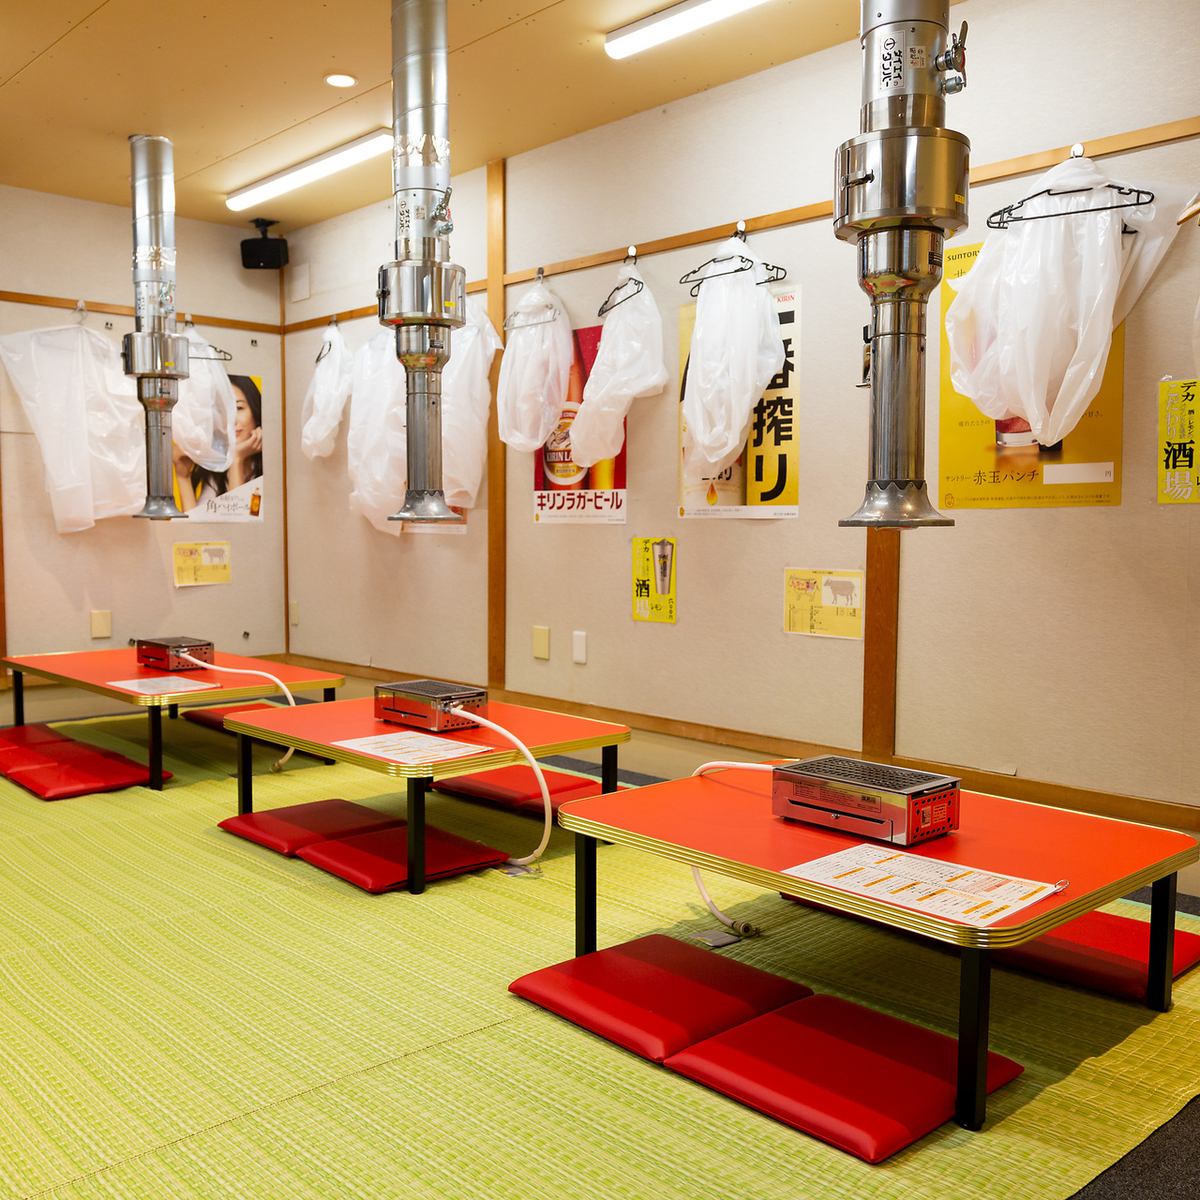 The 2nd floor tatami room can be reserved for 18 to 30 people! A private space!